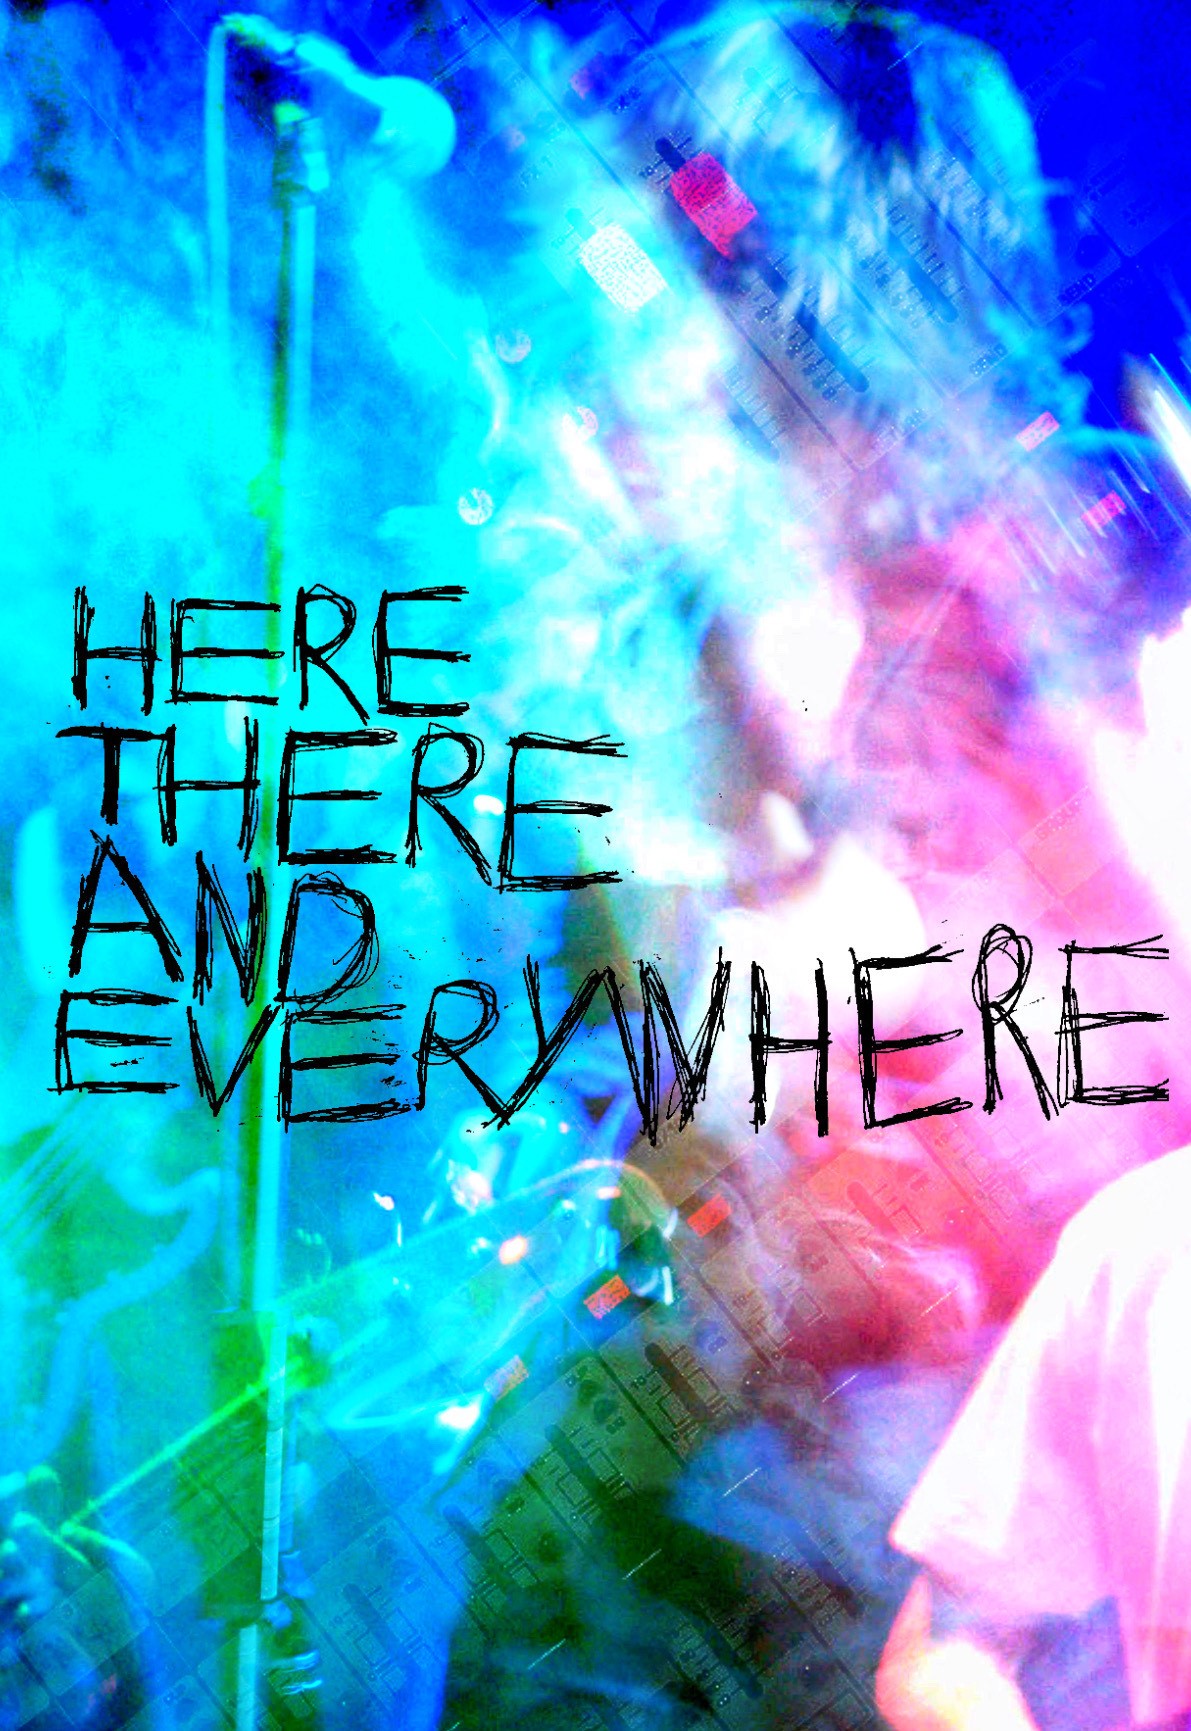 Here, There and Everywhere – Level 3 Music Show – 09/12/22